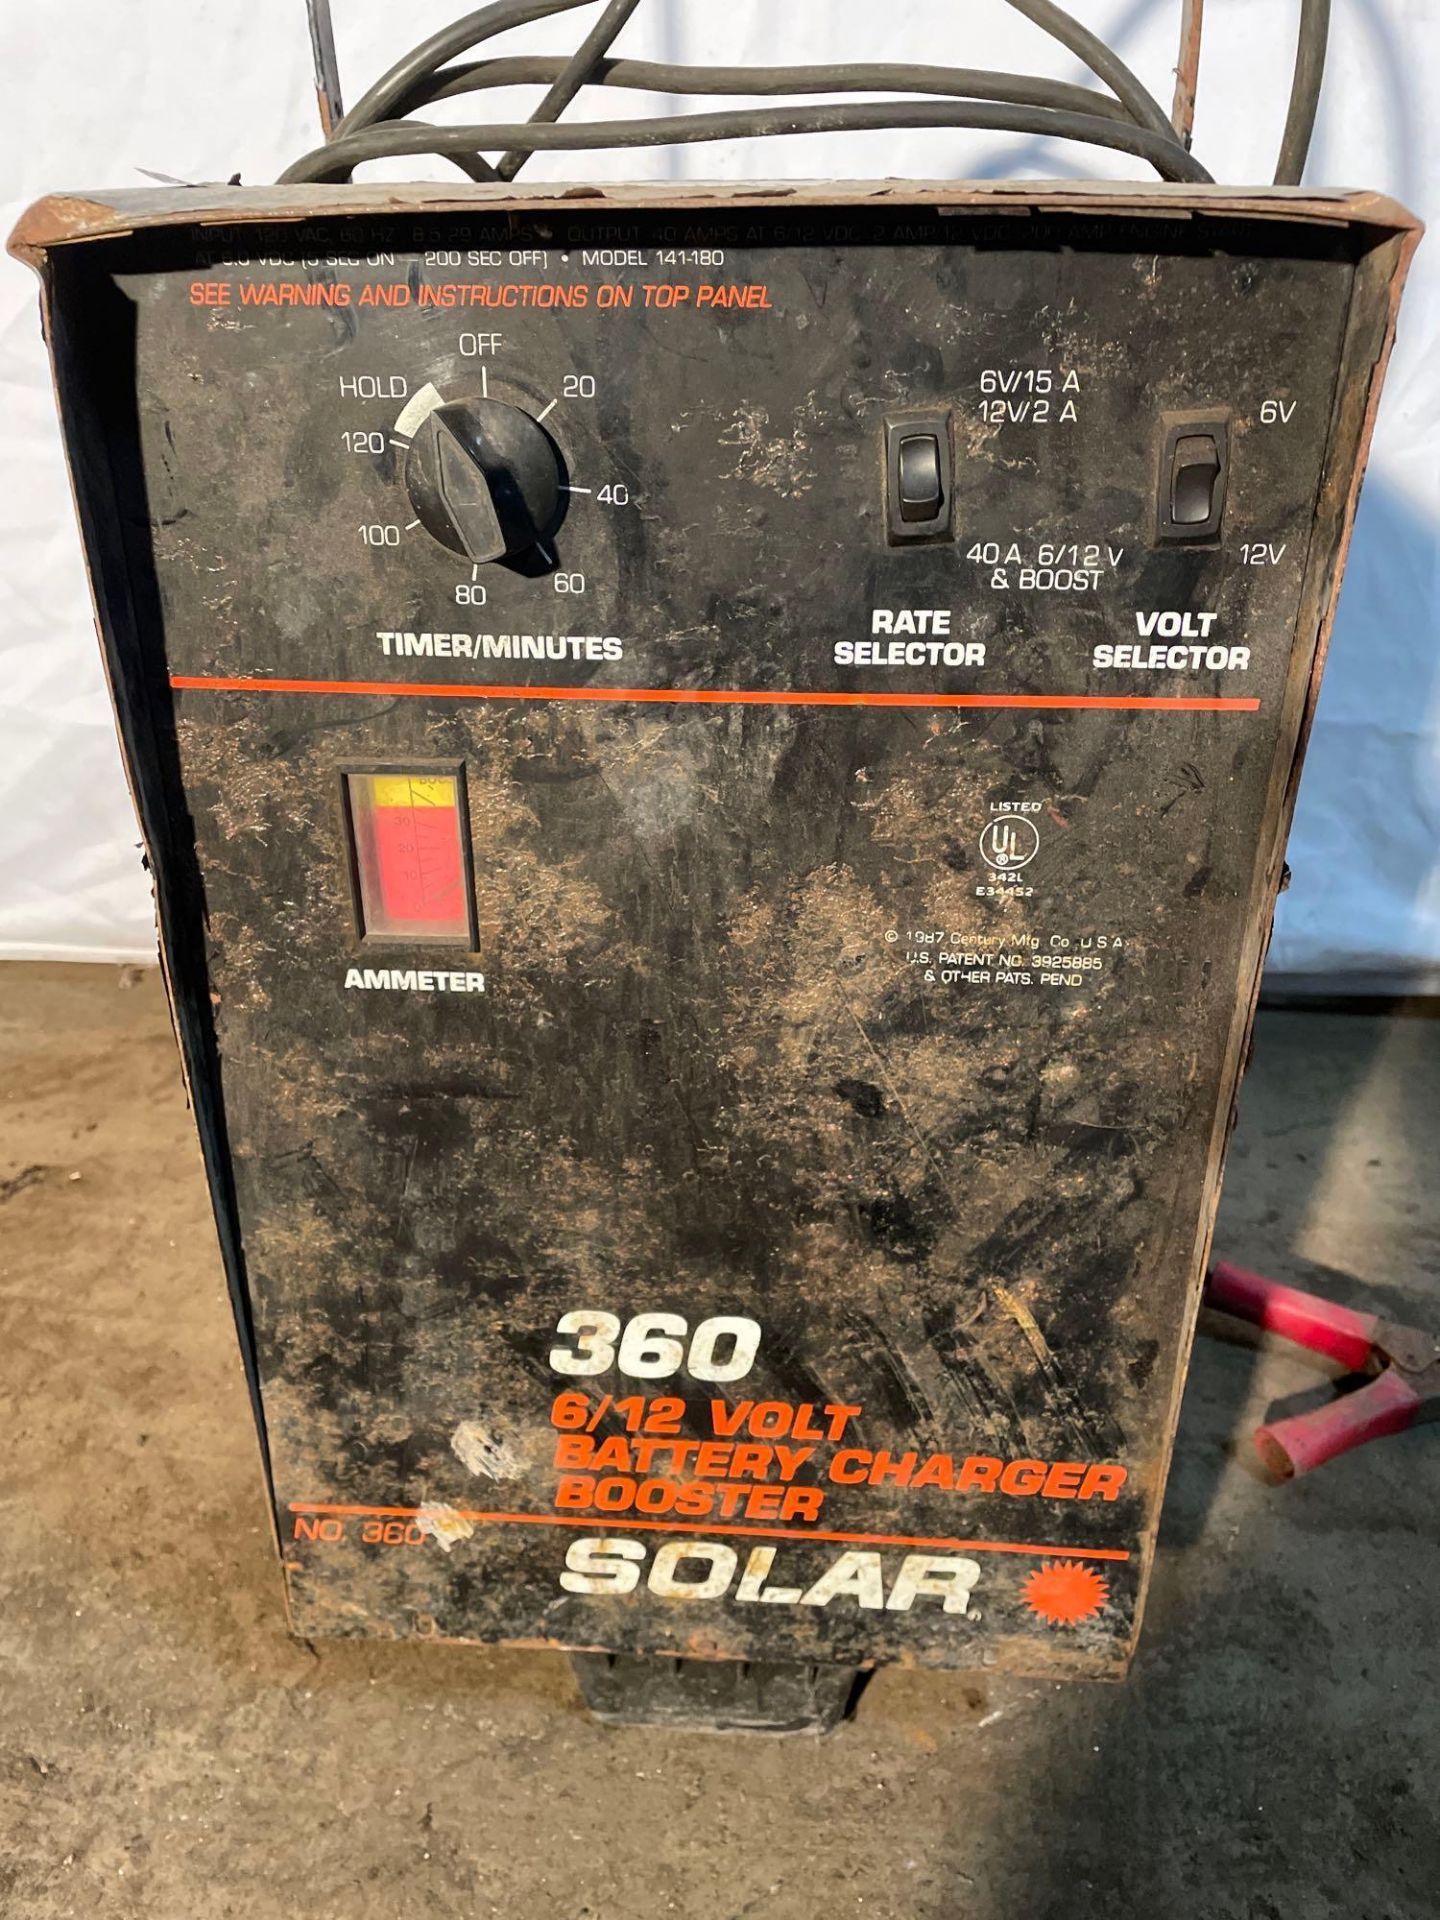 Solar 360 6/12V Battery Charger/Booster - Image 4 of 4